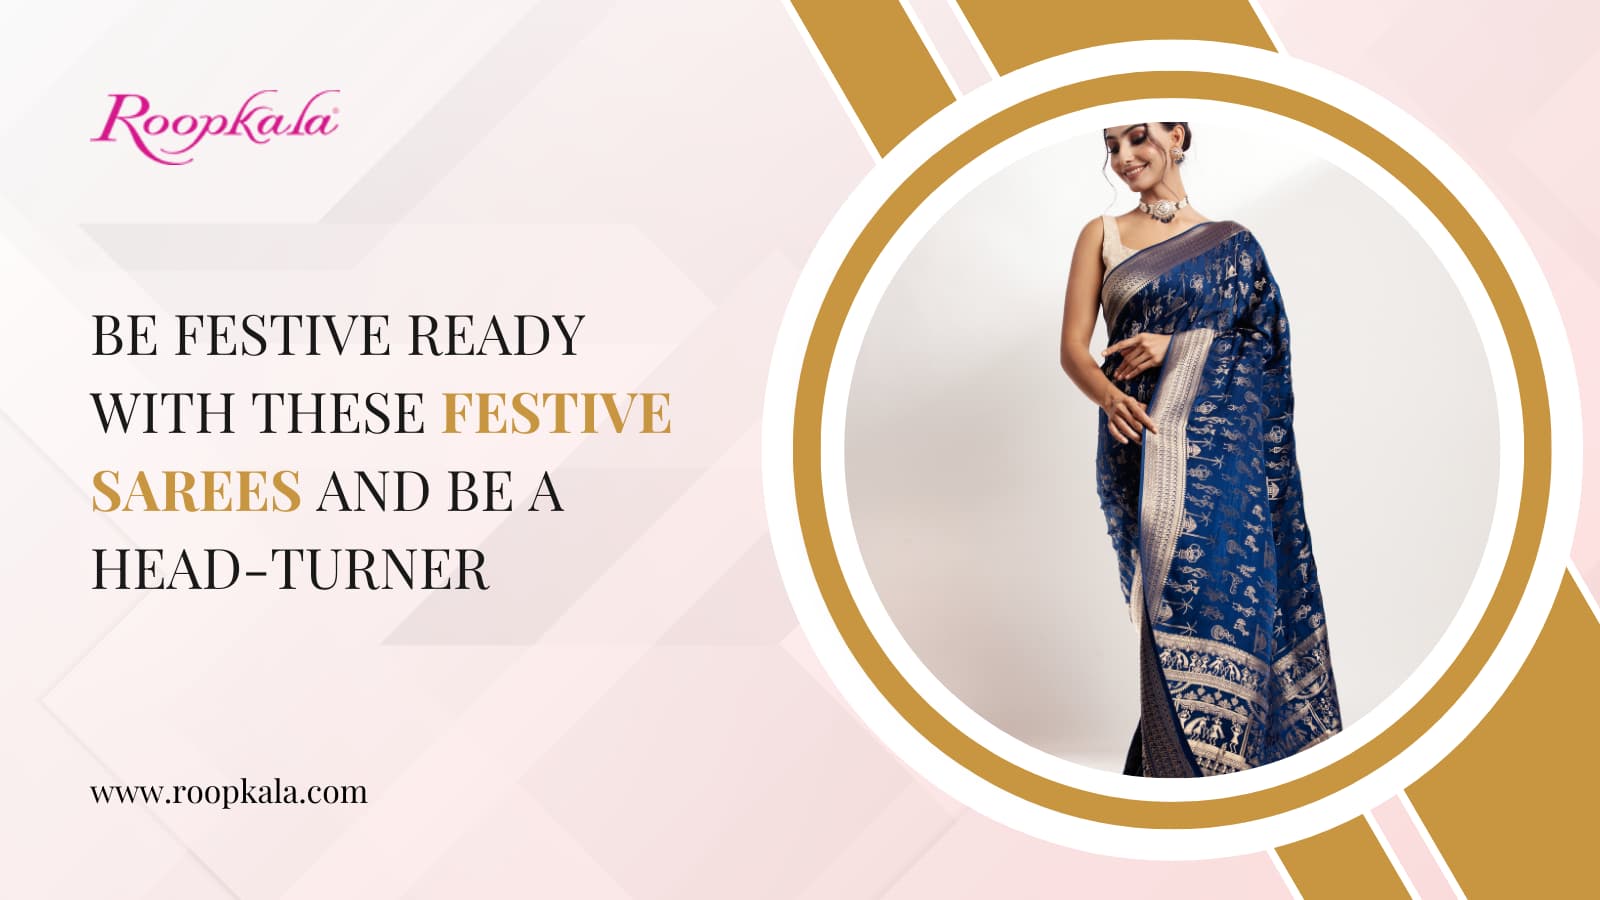 Be Festive Ready With These Festive Sarees And Be A Head-Turner